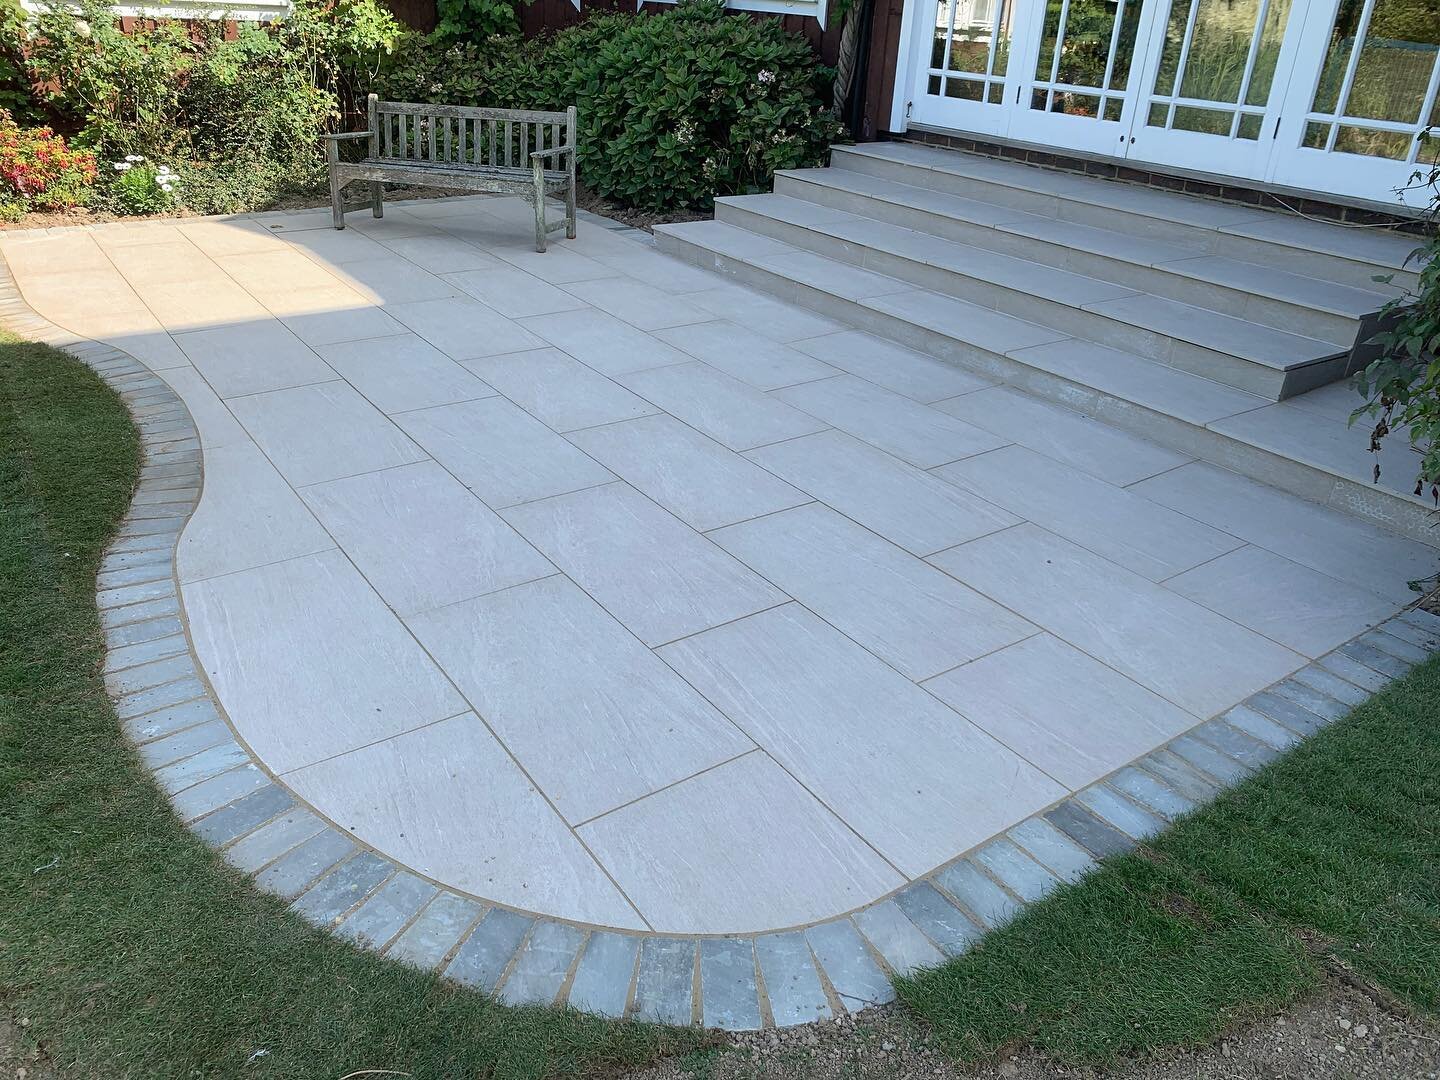 Completion this week of an Italian sand porcelain patio finished off with Indian Sandstone Kandla Grey cobbles.  #porcelain #paving #patiodecor #contemporary-paving #craftmanship #forest-row #East #Sussex #pnpavingsupplies